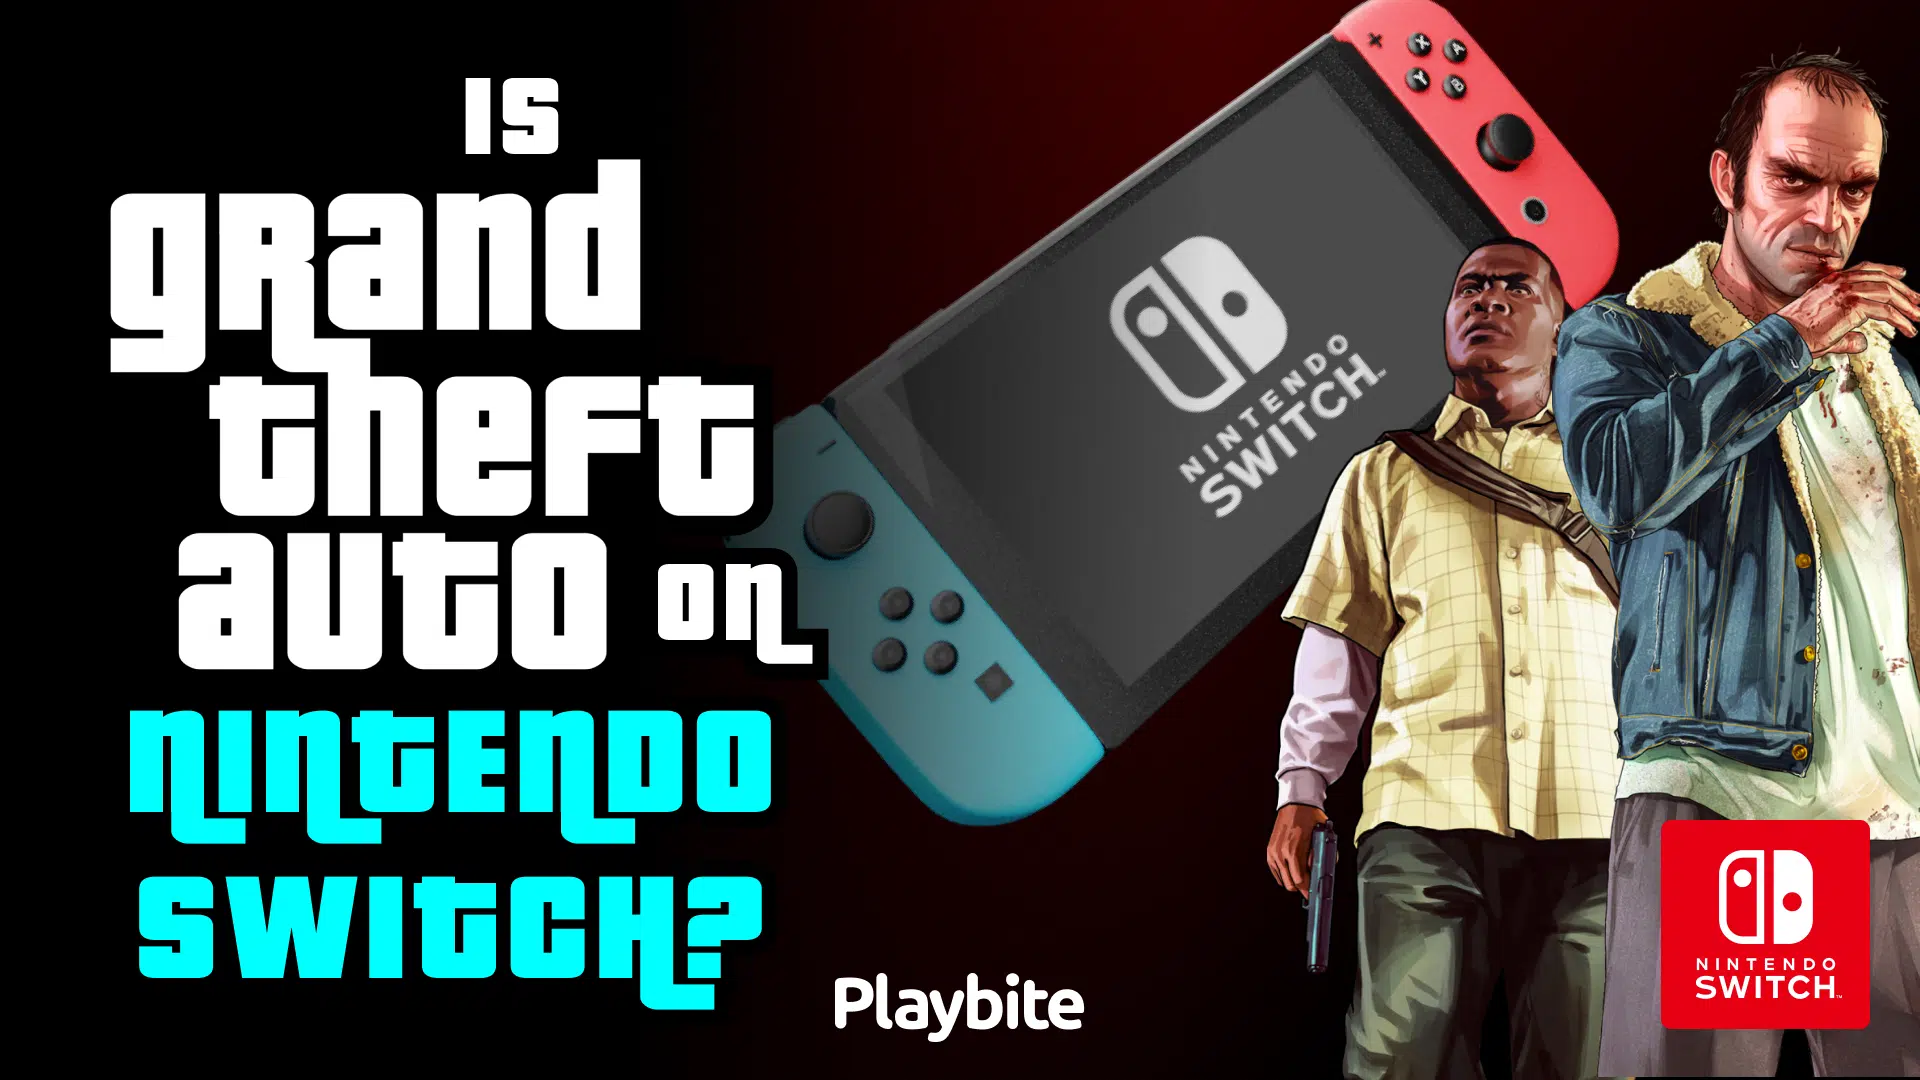 Is Grand Theft Auto on Nintendo Switch?